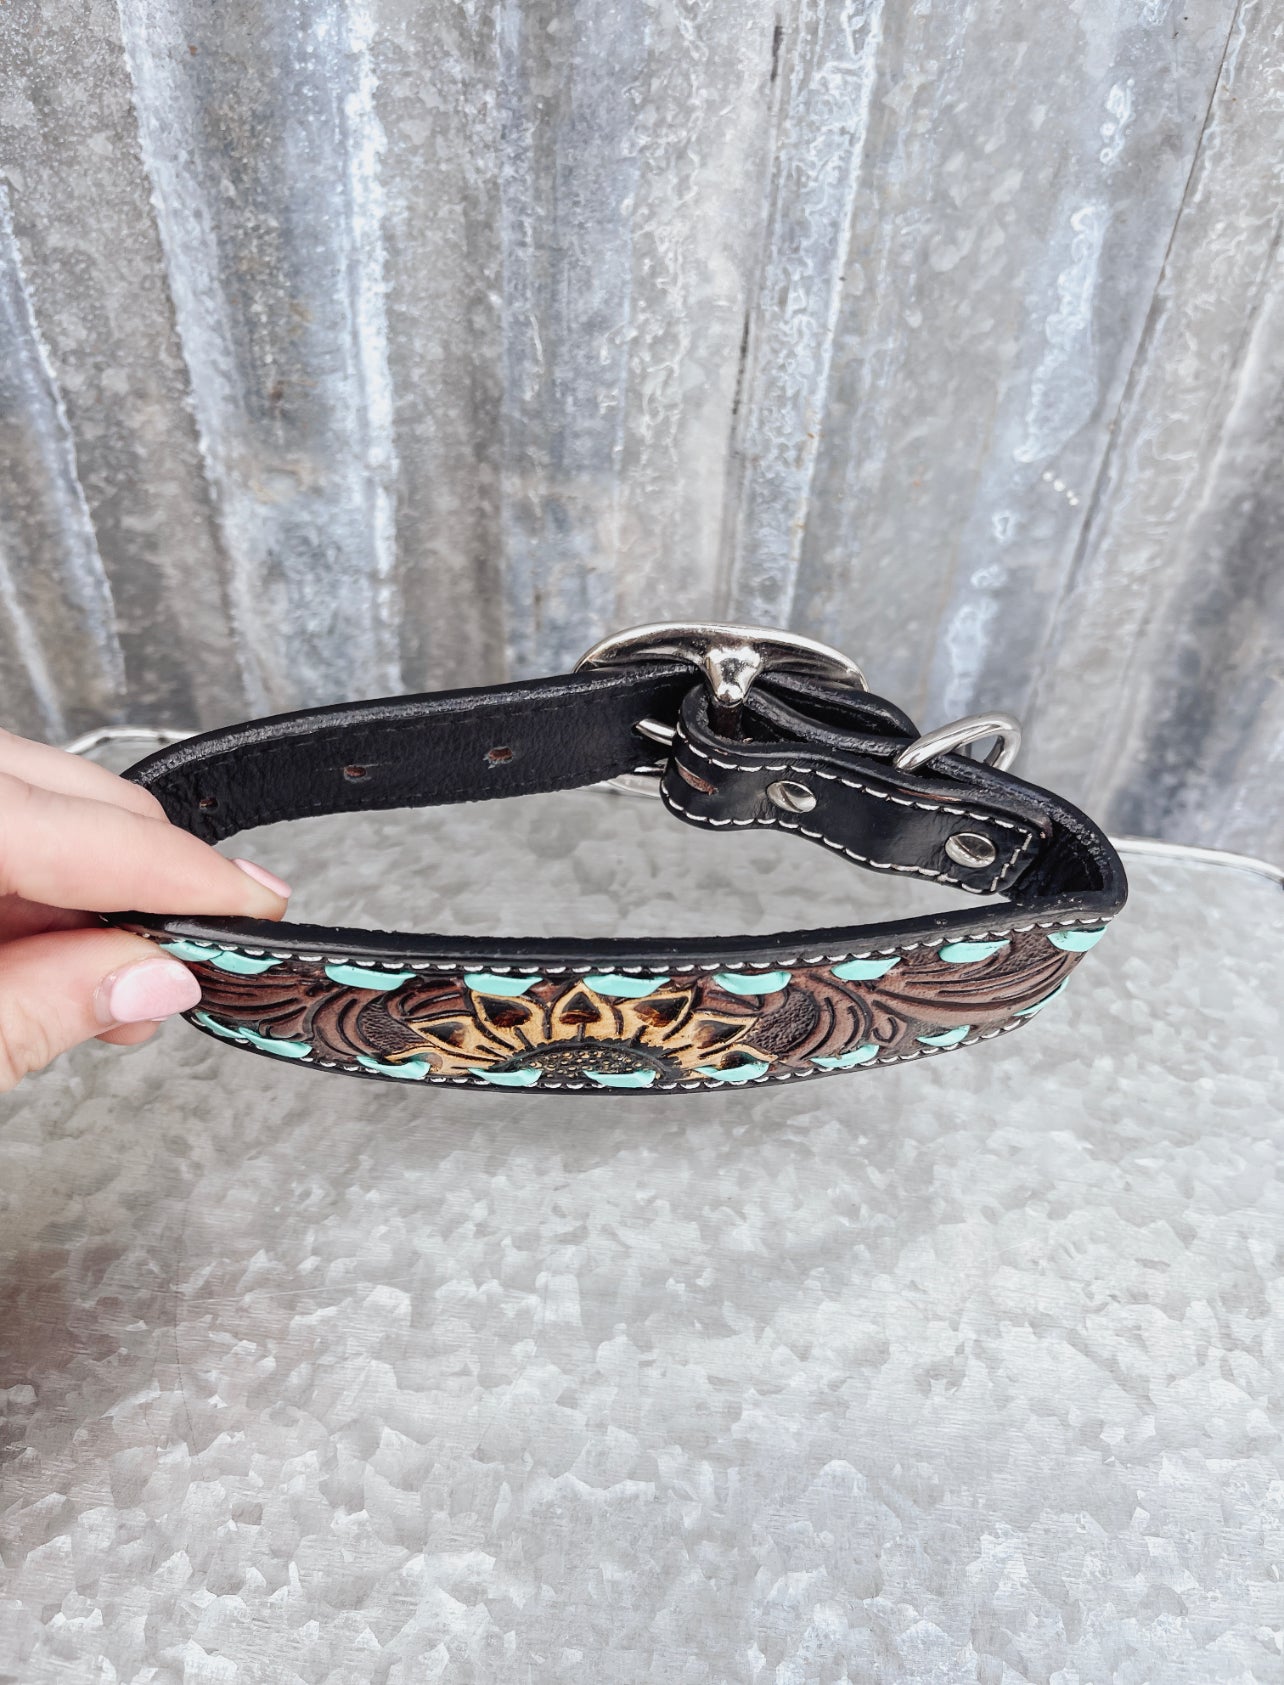 The Scenic Leather Dog Collar